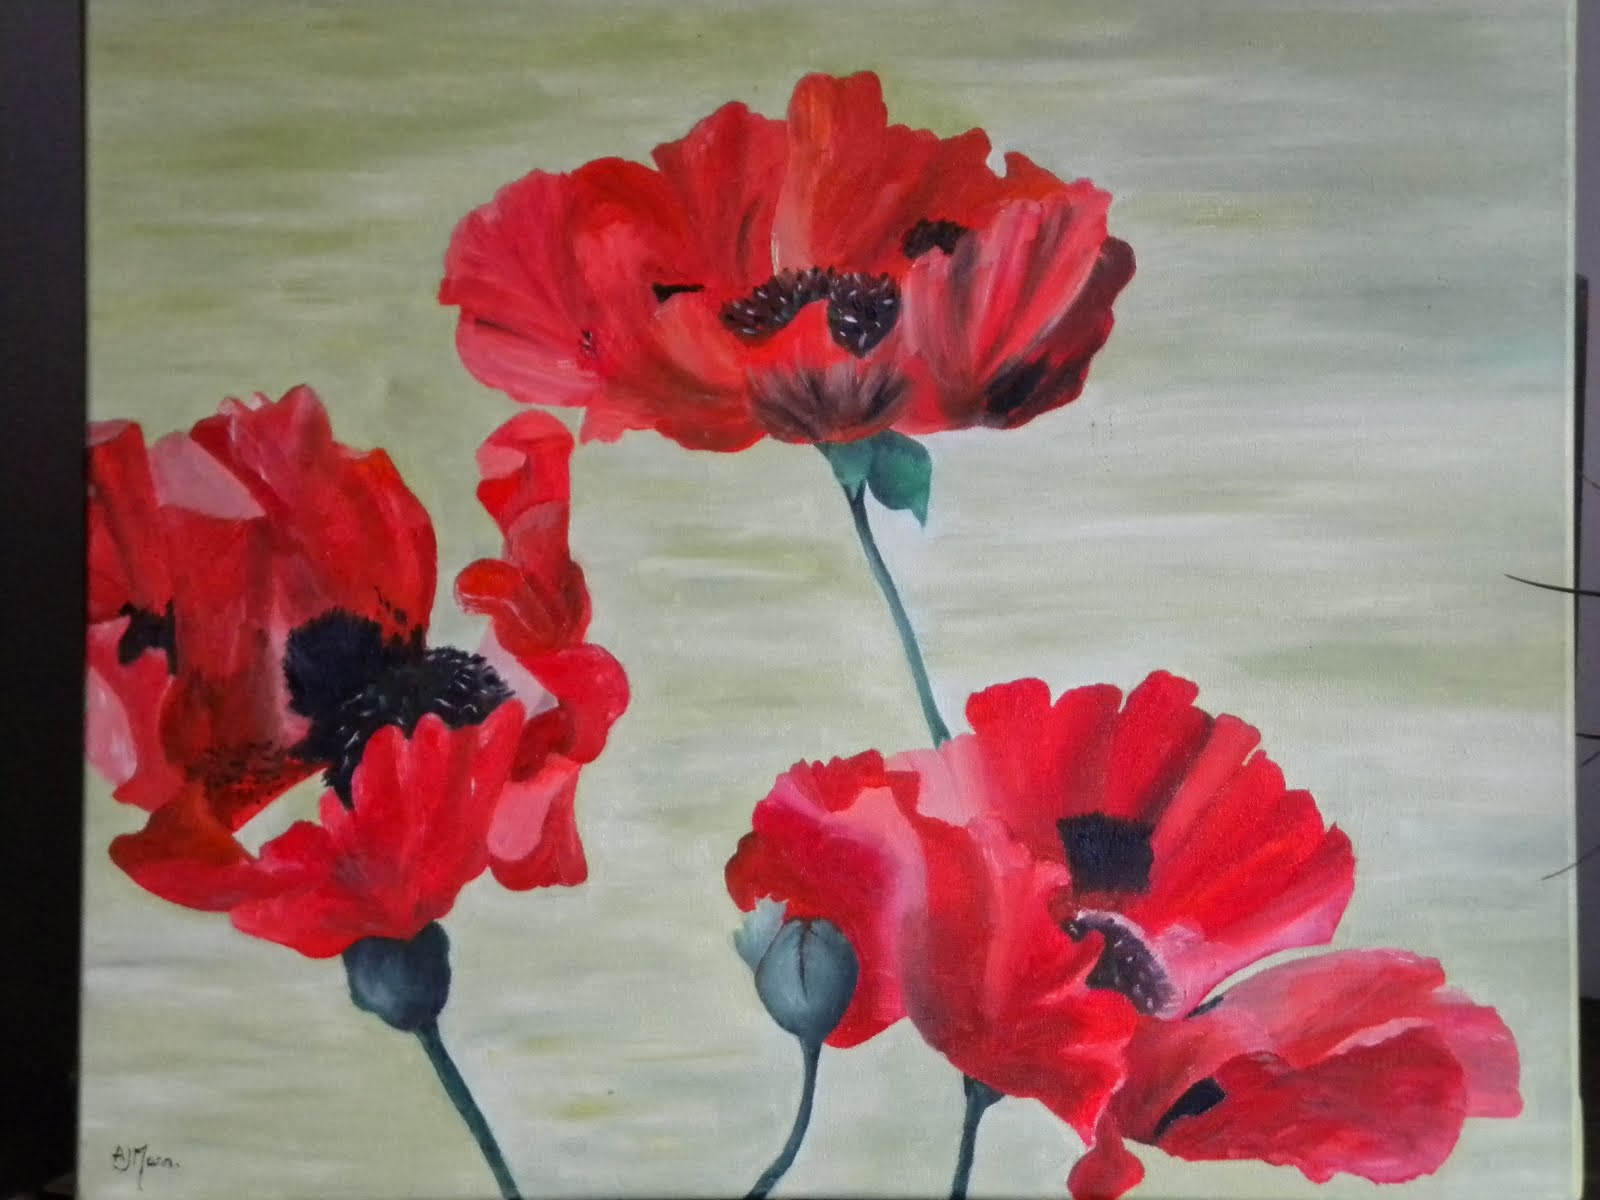 Poppies by Alison Mann